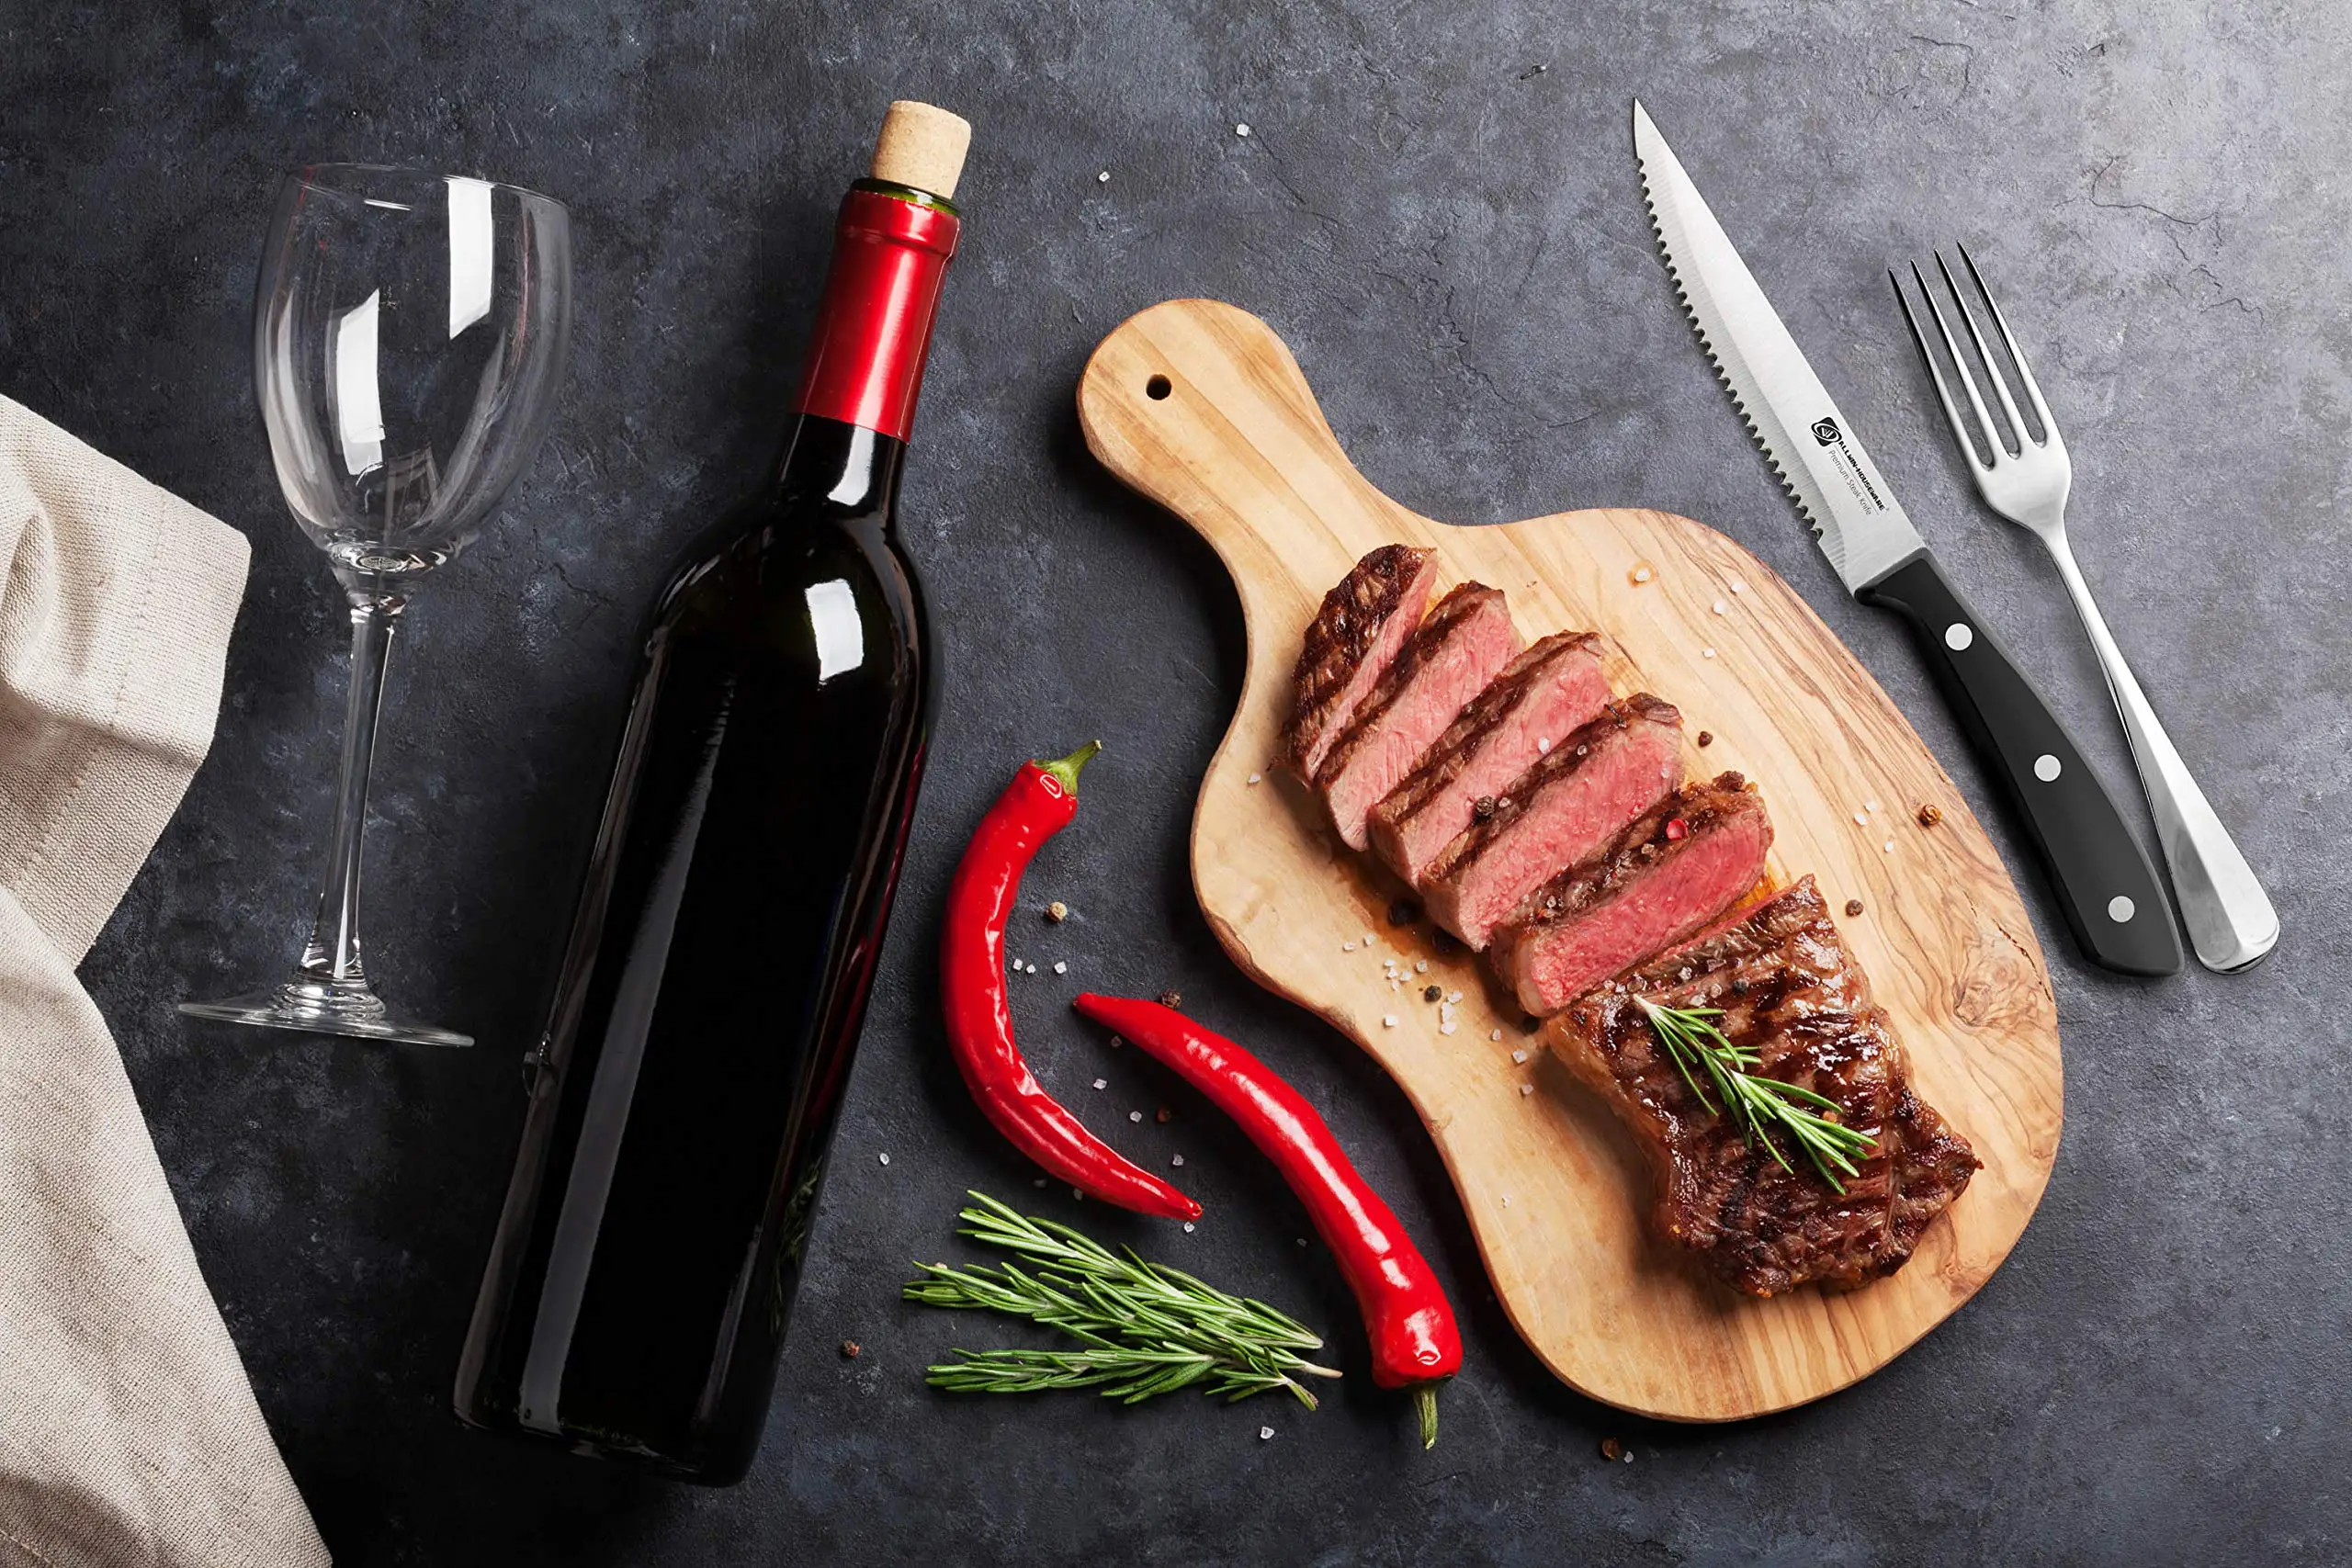 8 Of The Best Wines To Pair With Steak For A Dinner Well Done